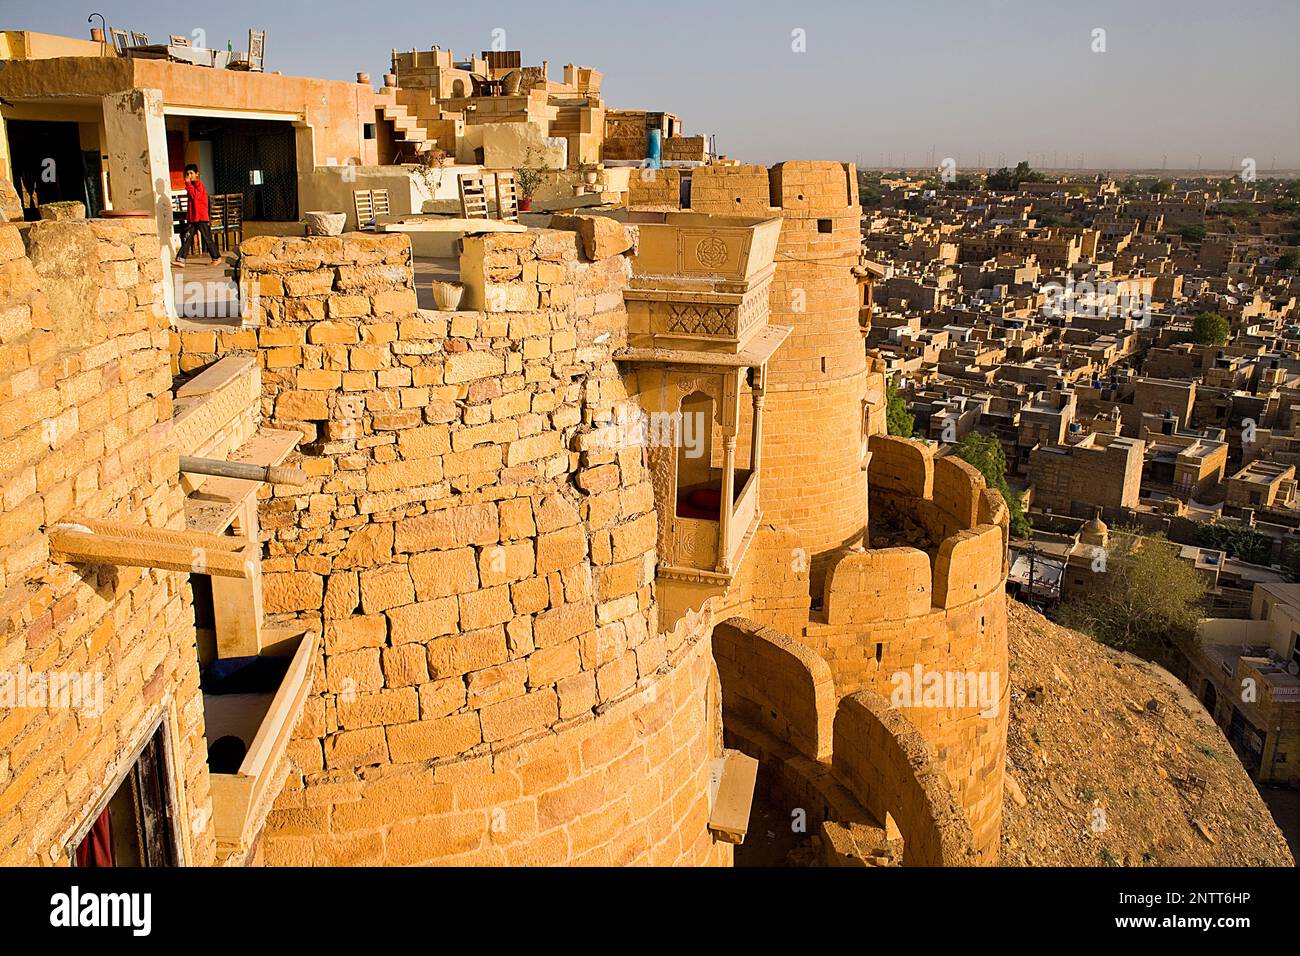 Rampart of the fort and the city â€‹â€‹rooftops in background,Jaisalmer, Rajasthan, India Stock Photo